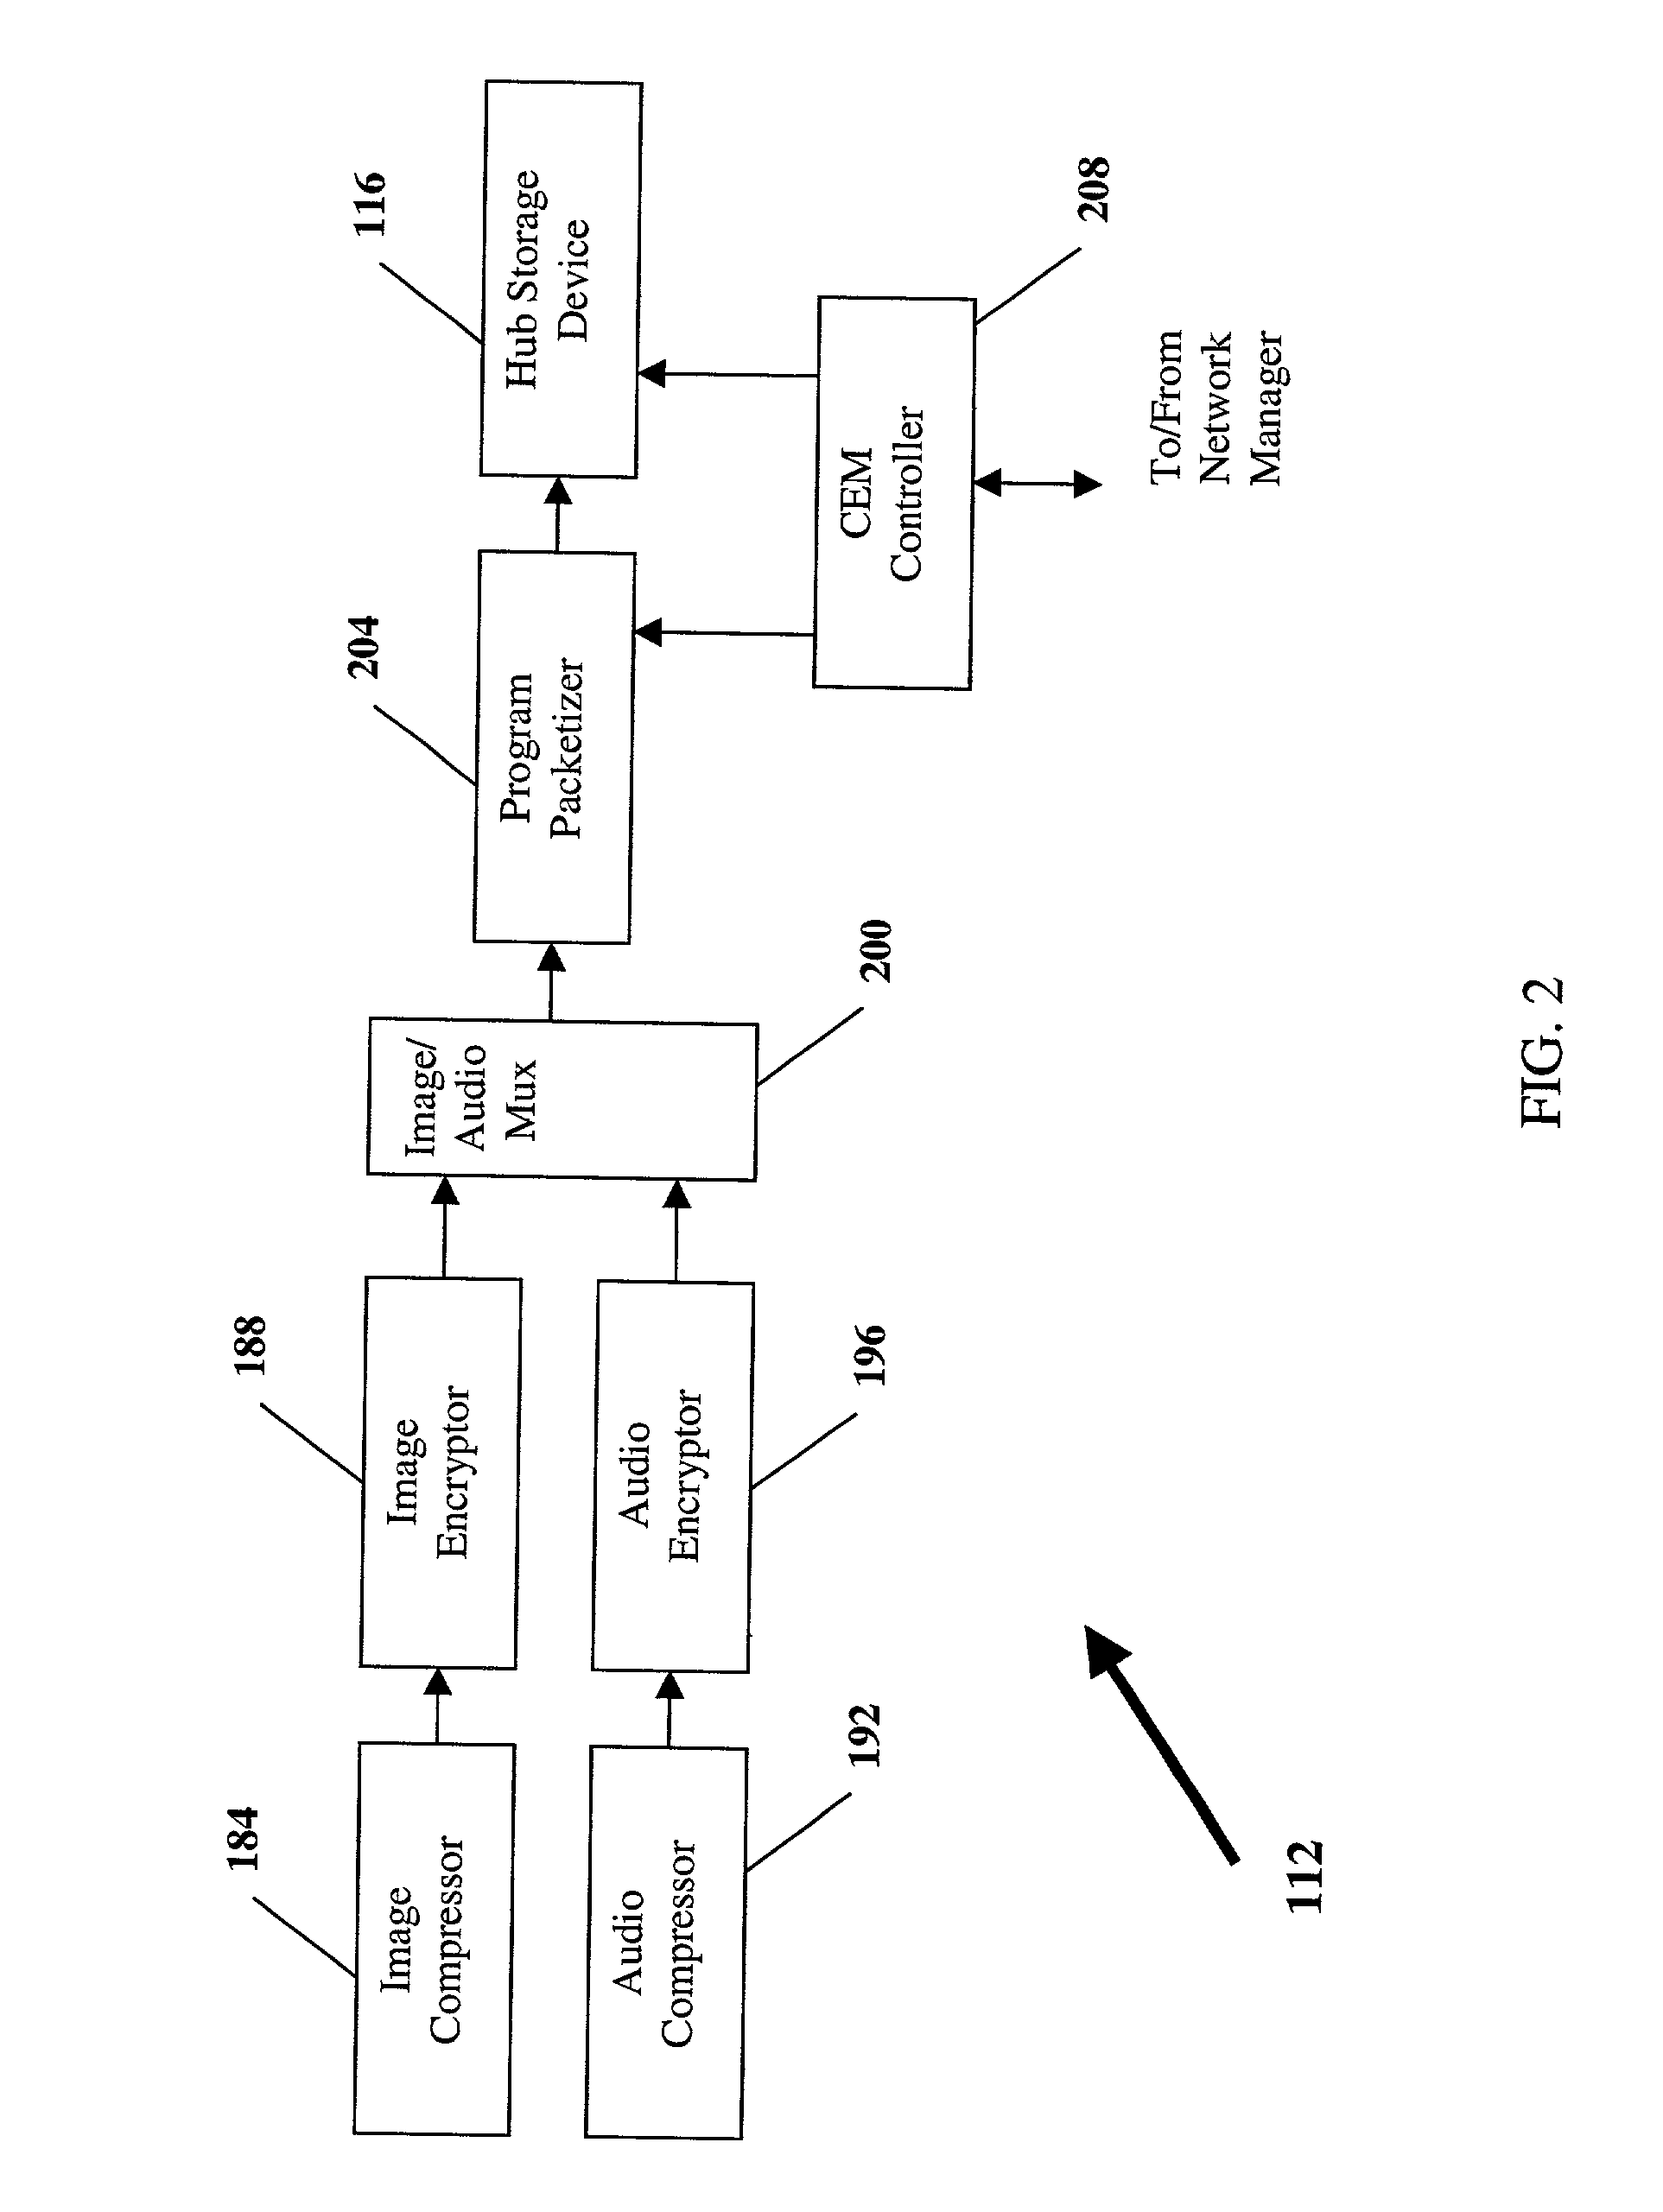 Apparatus and method for watermarking a digital image